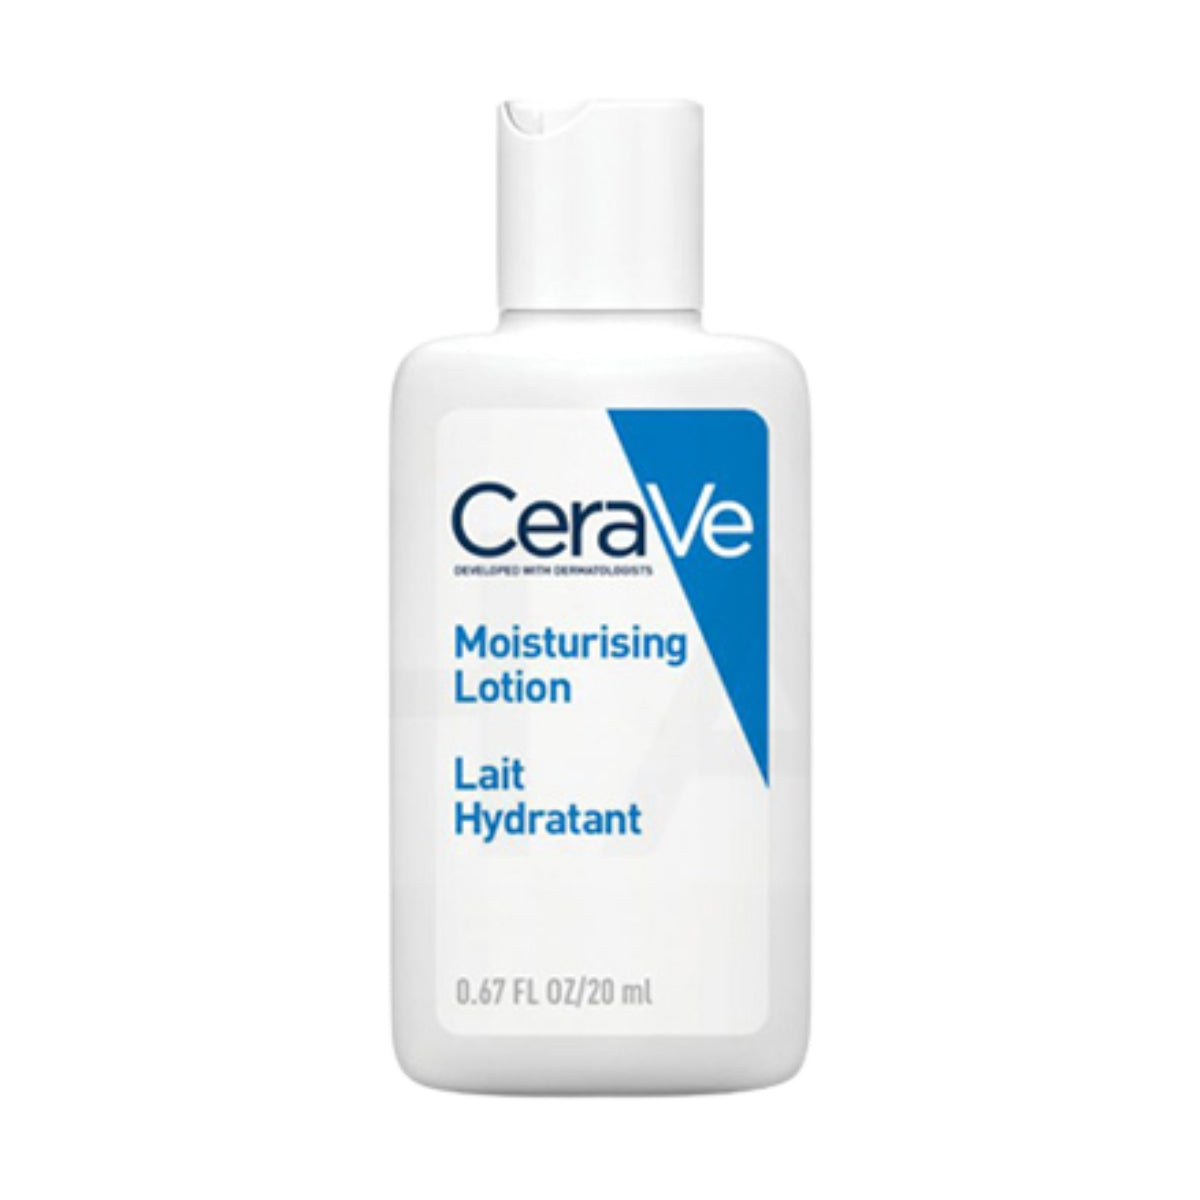 Free CeraVe Moisturizing Lotion 20ml when you purchase 2 or more products from Cerave. One gift per person. While stocks last.